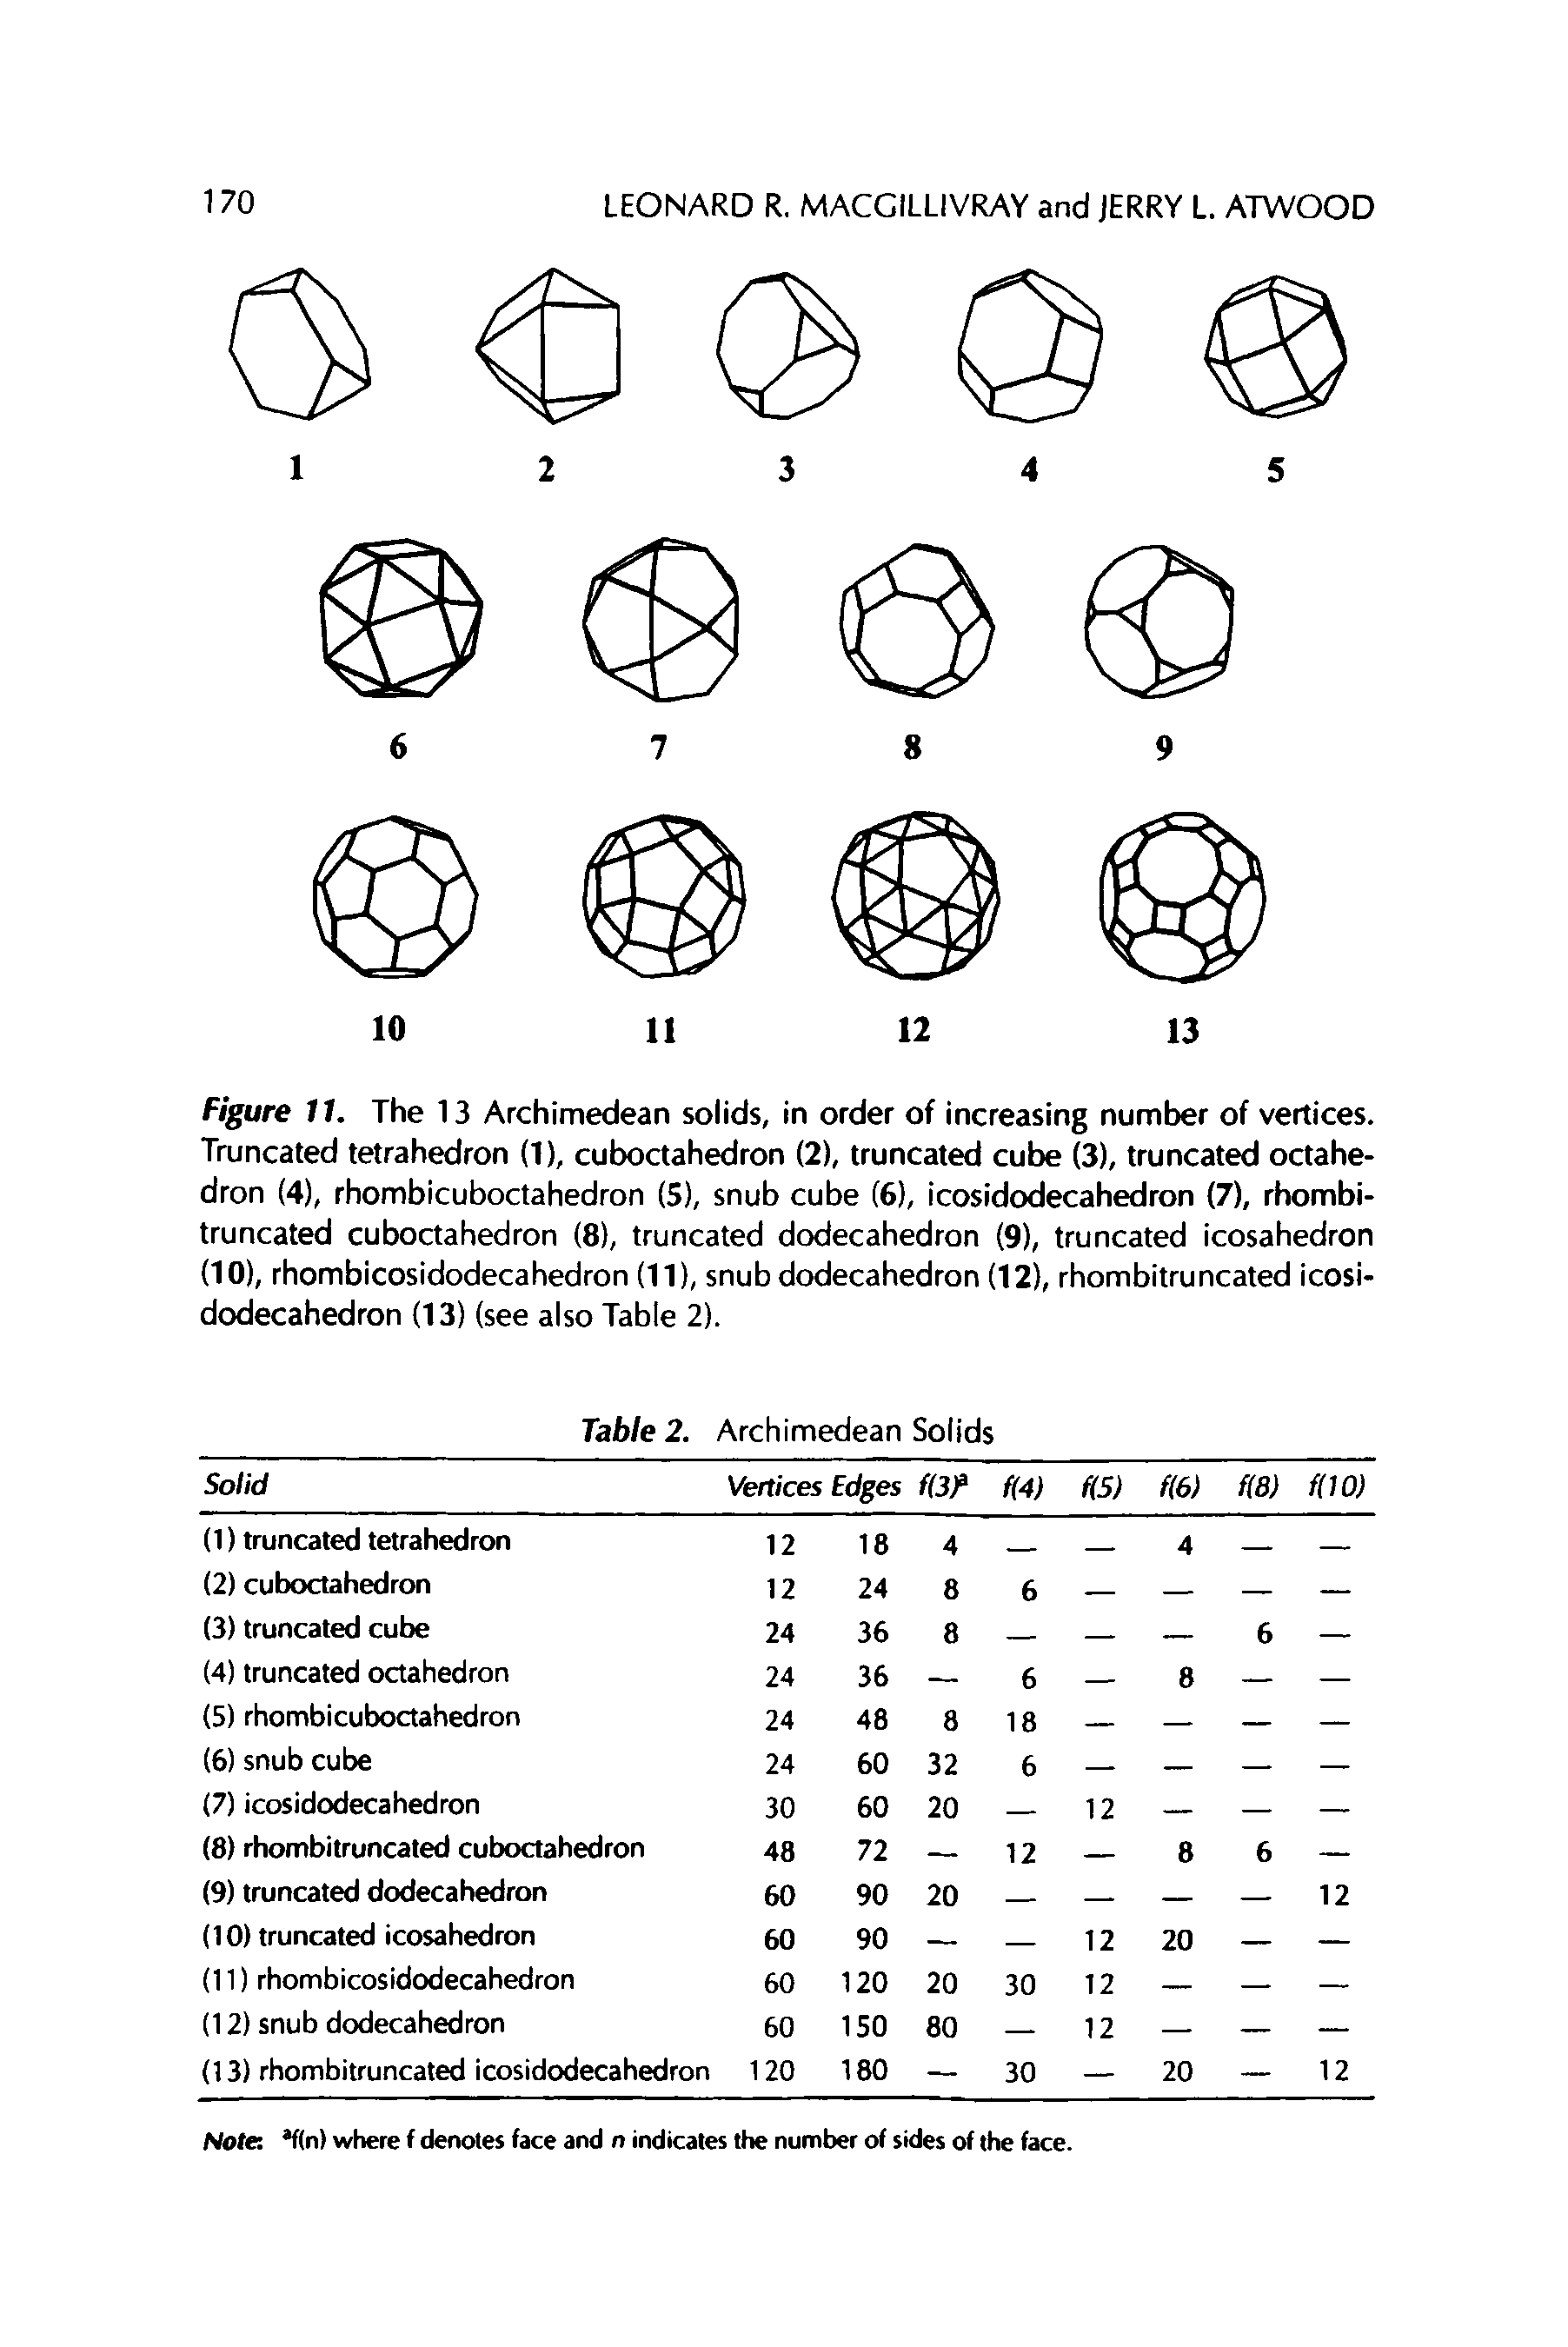 Figure 11. The 13 Archimedean solids, in order of increasing number of vertices. Truncated tetrahedron (1), cuboctahedron (2), truncated cube (3), truncated octahedron (4), rhombicuboctahedron (5), snub cube (6), icosidodecahedron (7), rhombi-truncated cuboctahedron (8), truncated dodecahedron (9), truncated icosahedron (10), rhombicosidodecahedron (11), snub dodecahedron (12), rhombitruncated icosidodecahedron (13) (see also Table 2).